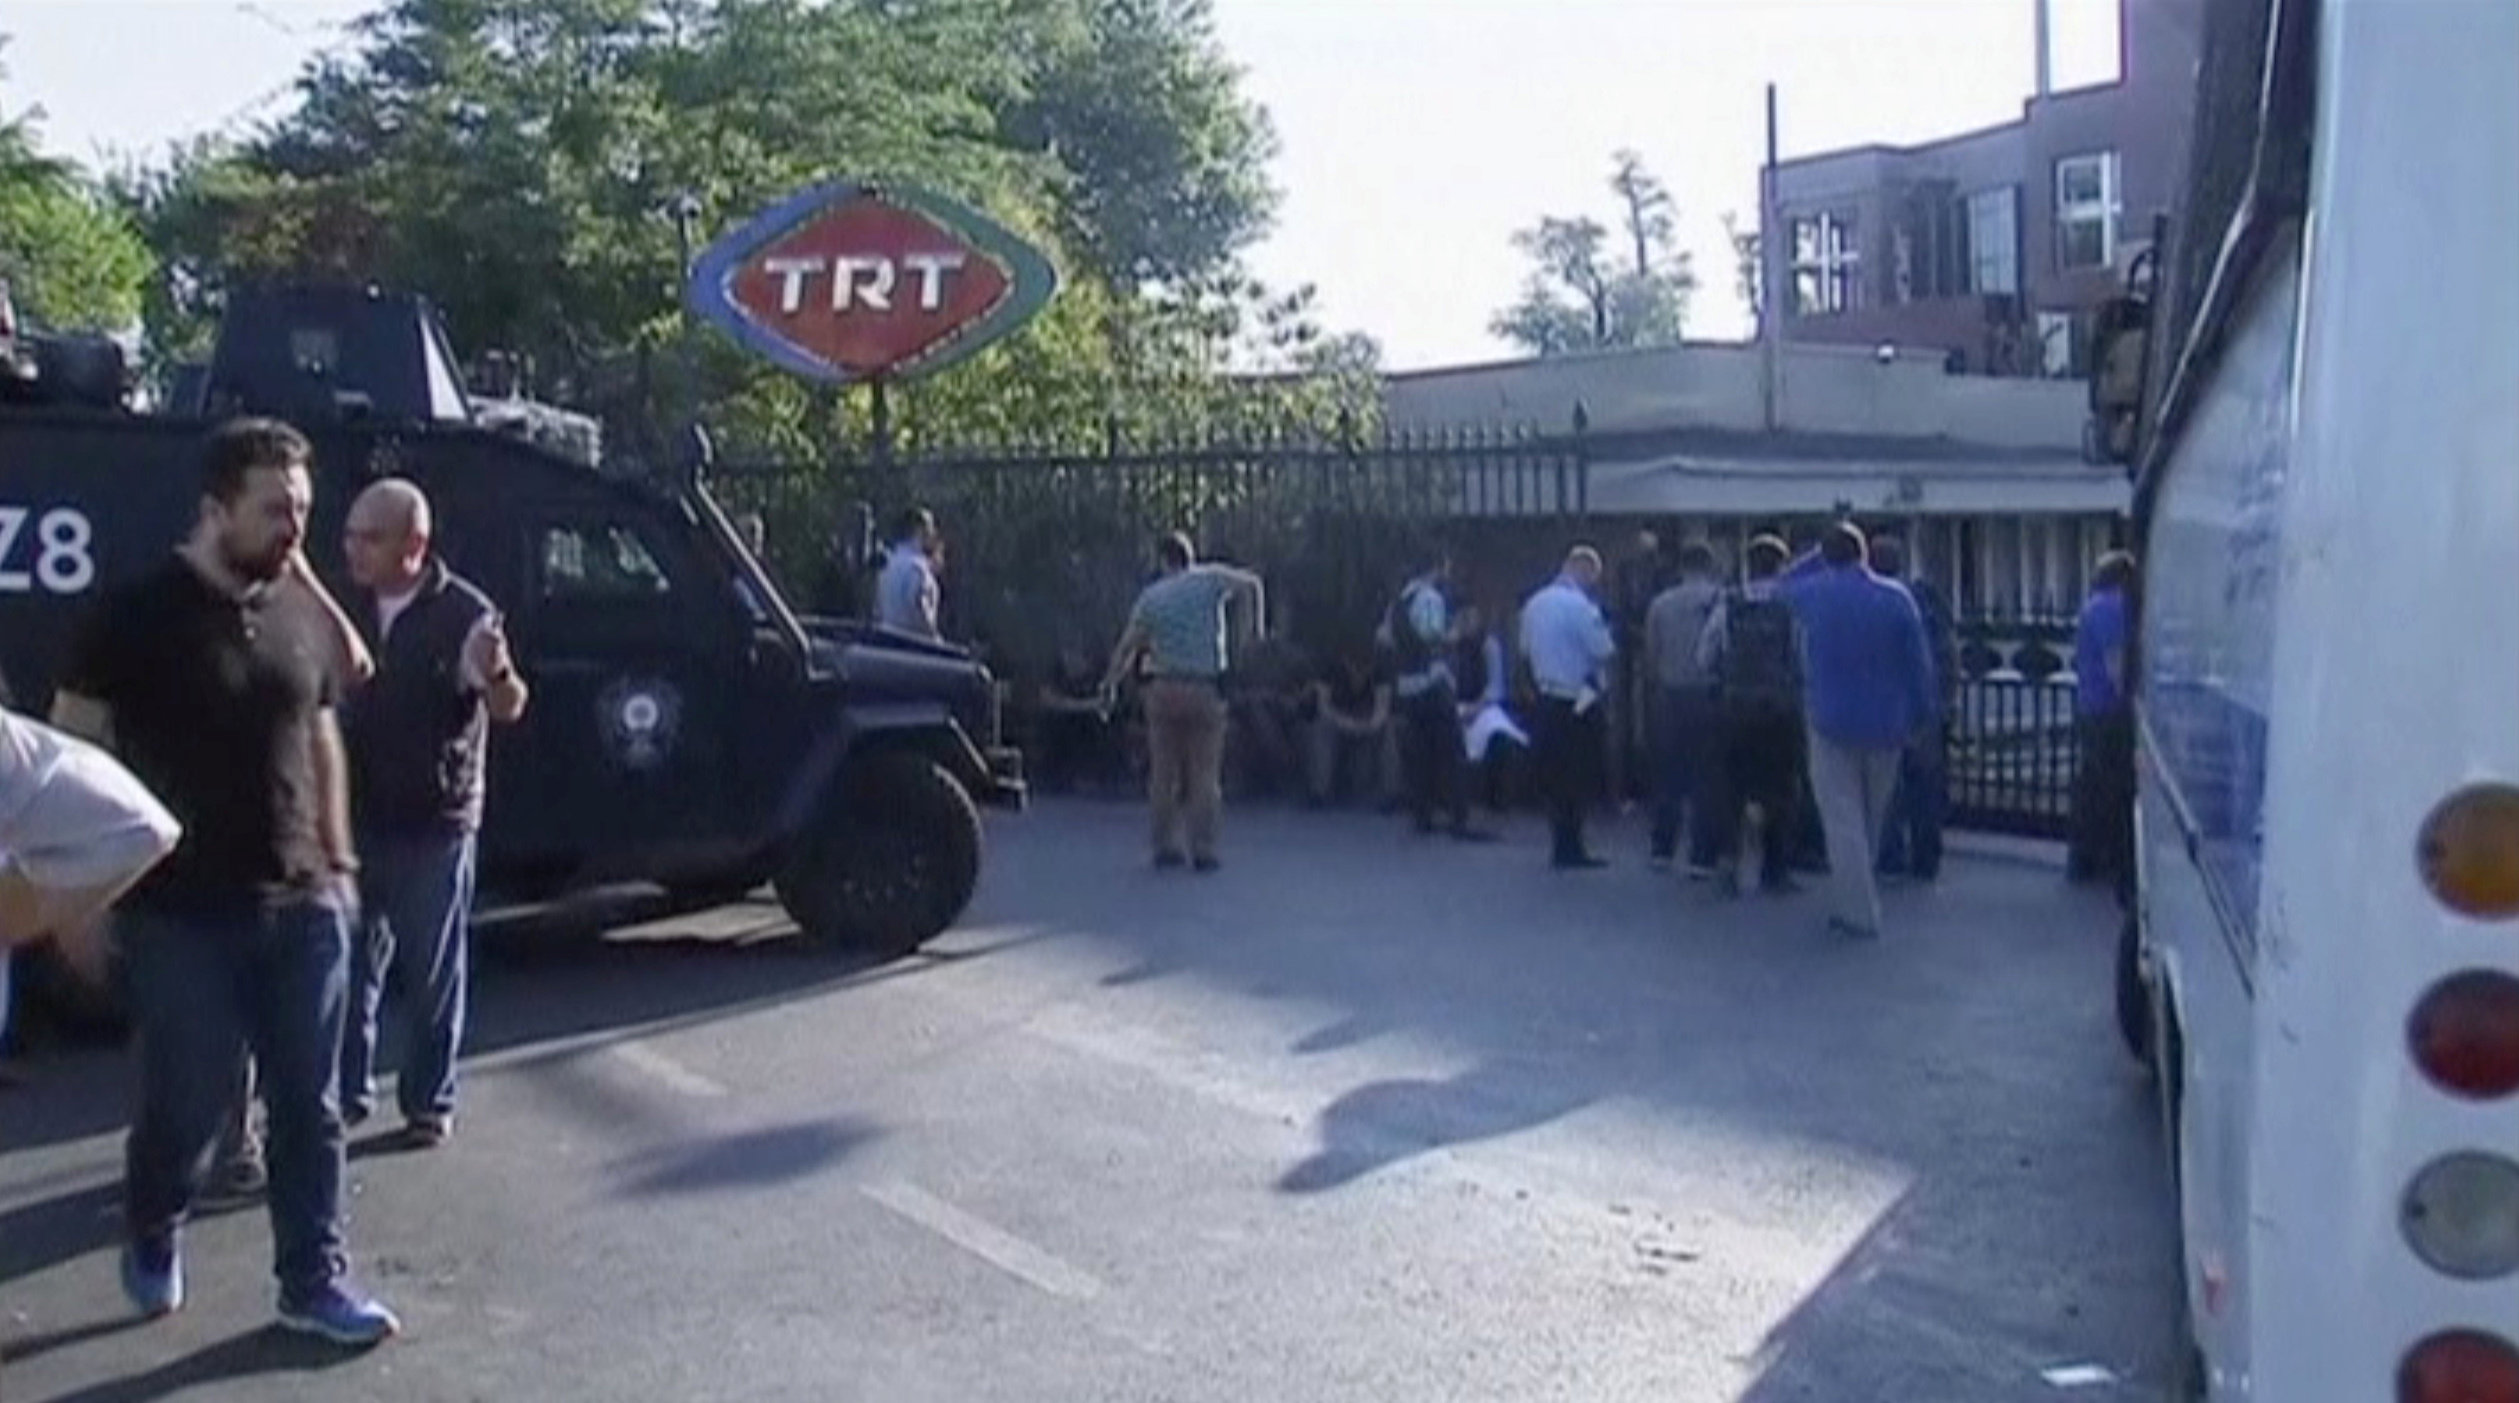 Police retook the TRT building in an the operation in the morning.